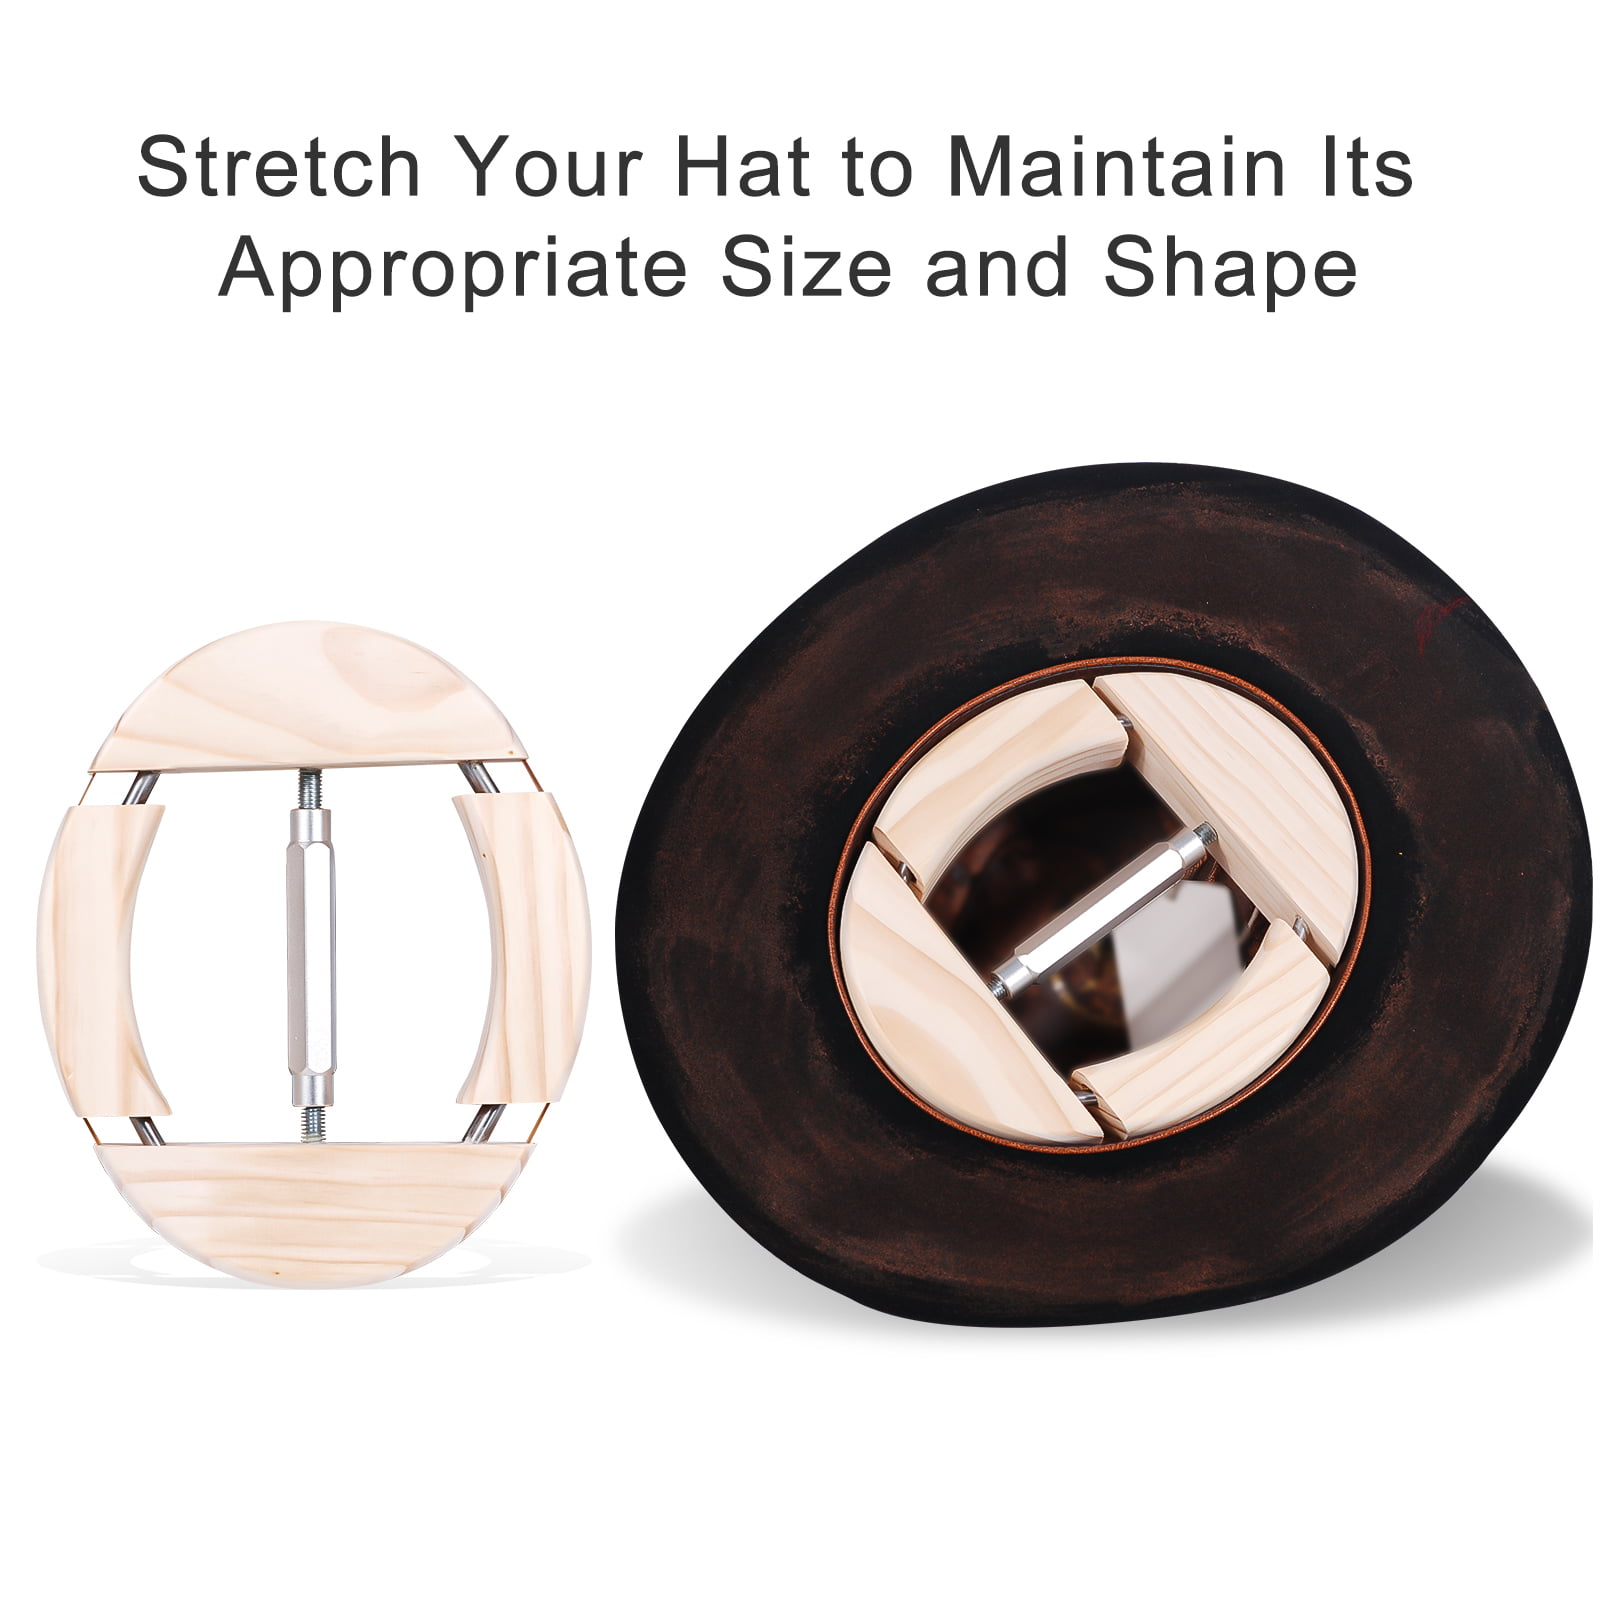 How To: Stretch Your Hat 